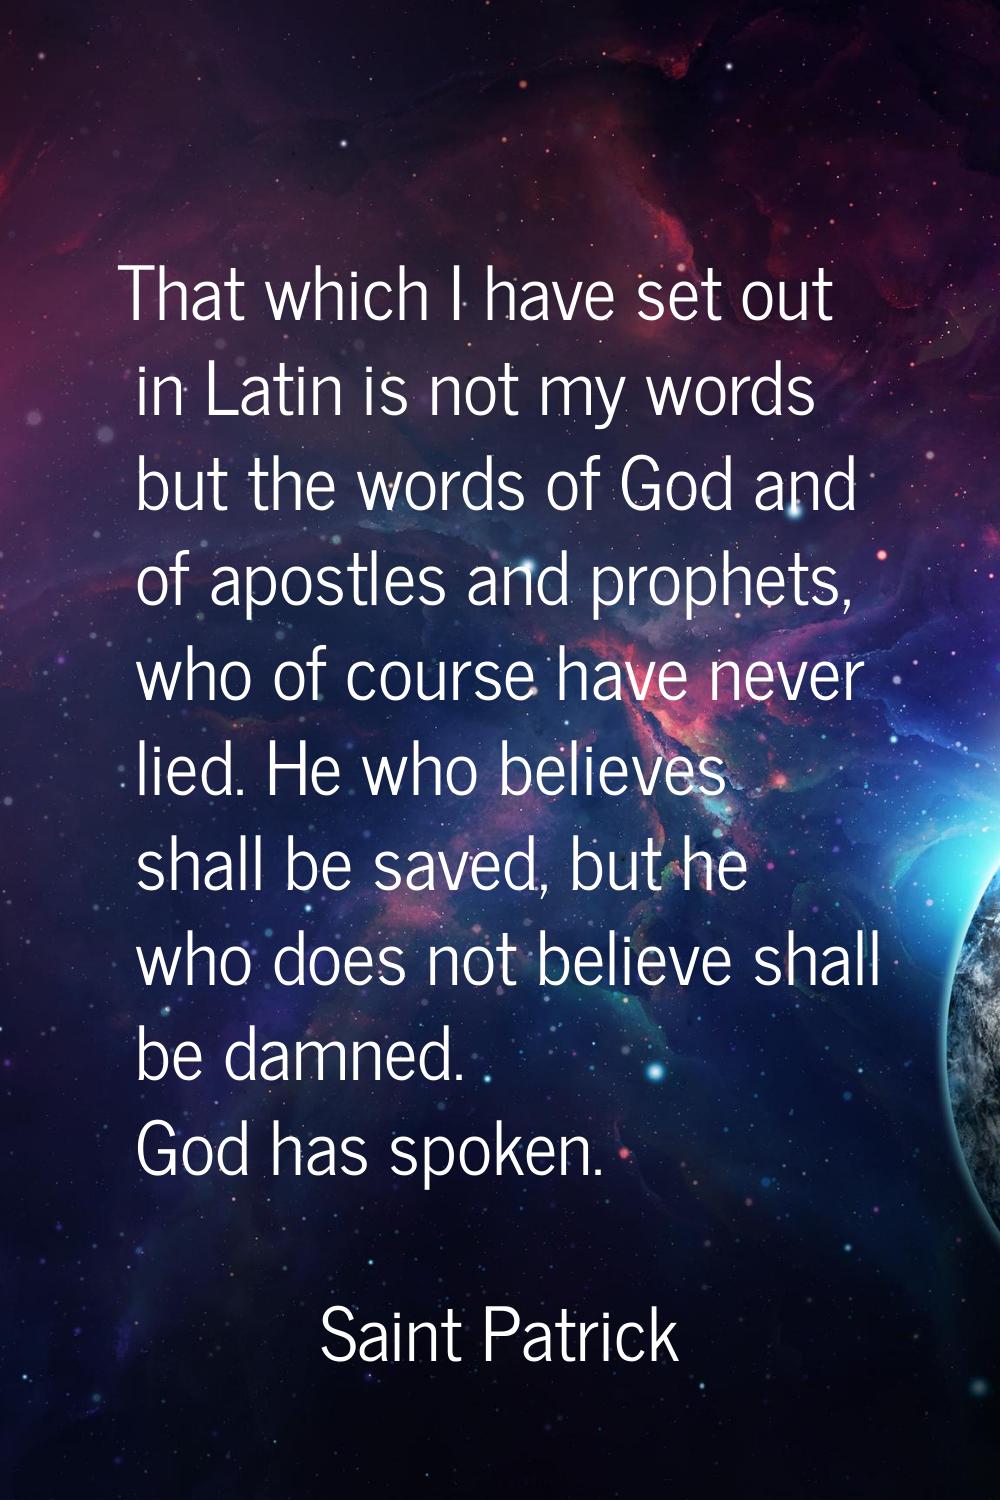 That which I have set out in Latin is not my words but the words of God and of apostles and prophet